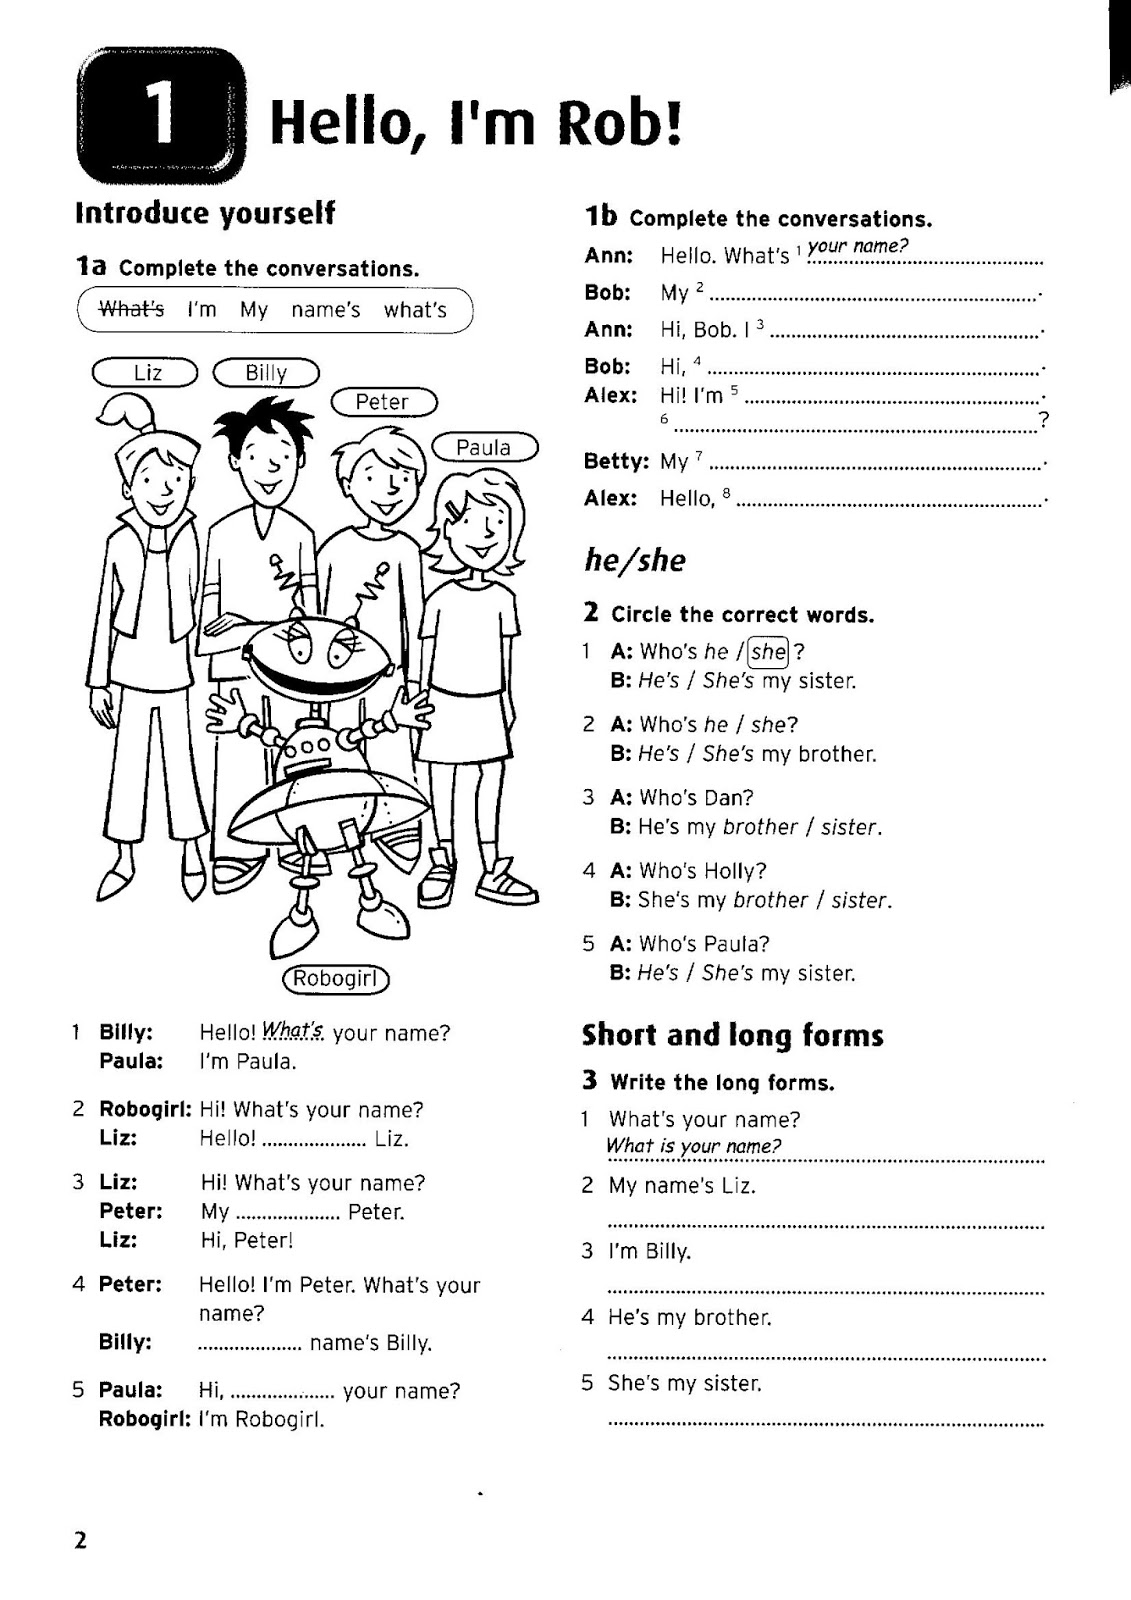 19-best-images-of-introduce-yourself-in-spanish-worksheets-introducing-yourself-spanish